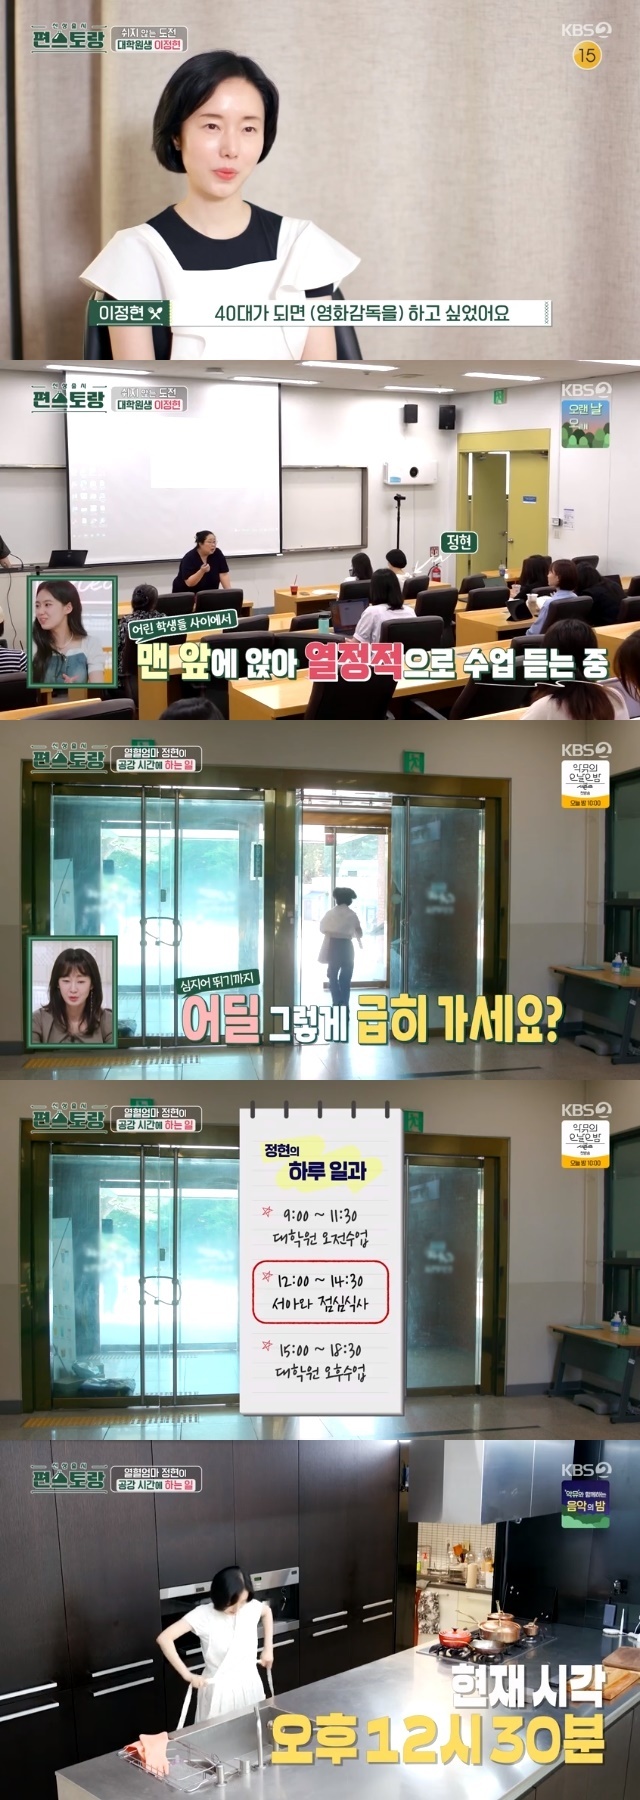 Actor Lee Jung-hyun showed a passionate manhakdo.On September 1, KBS 2TV entertainment Stars Top Recipe at Fun-Staurant (hereinafter Stars Top Recipe at Fun-Staurant) 191 times revealed Lee Jung-hyuns current status at university.Lee Jung-hyun, Lee Jung-hyun, said, I was a major in directing at university.One of my dreams was to be a movie director, but I wanted to do it when I was in my 40s.As soon as I got pregnant with SeoA and gave birth to SeoA, I entered the Baro Graduate school as soon as I finished my work and wanted to study more systematically. He said, I am going to graduate school in almost 20 years.Lee Jung-hyun said in an interview when he was 22 years old, I always wanted to be a director because I always liked movies since I made my debut when I was 15 years old.Im studying hard, he said.Meanwhile, Lee Jung-hyun ran to the house for a no class time, and he was surprised to say, Im going to give SeoA rice, the house is next to Baro, I really get SeoA rice.